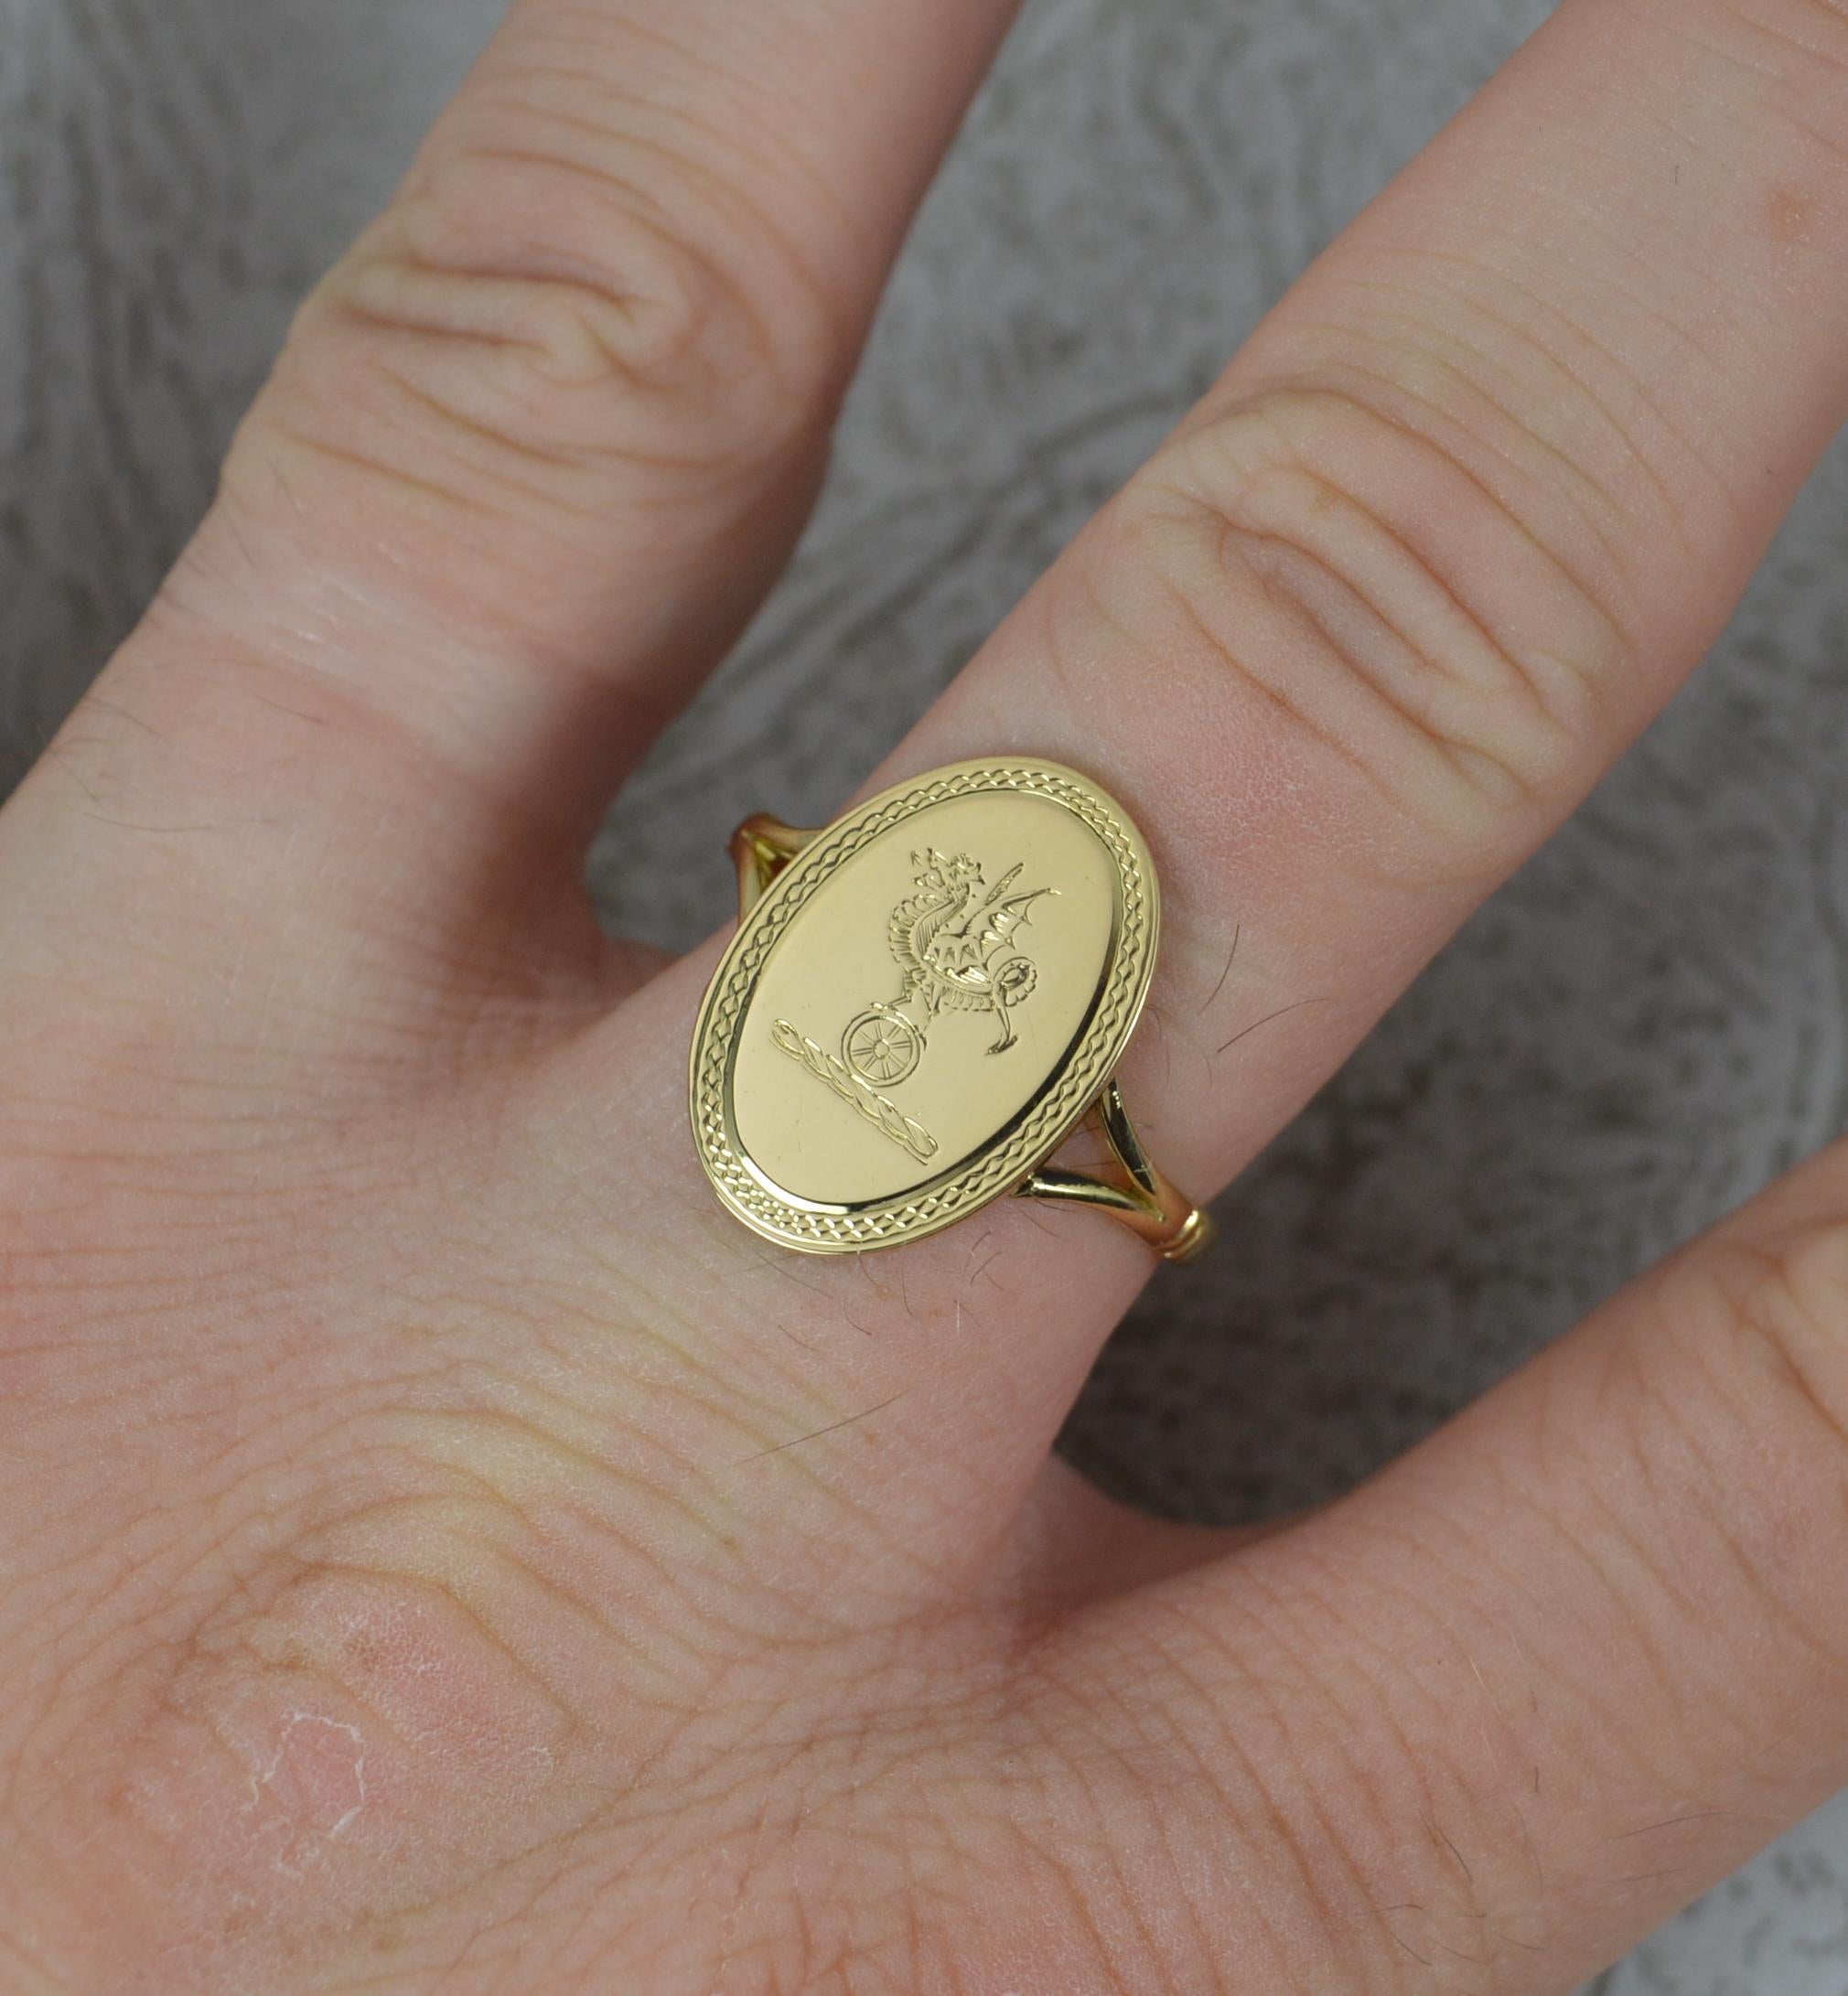 A superb antique signet ring, circa 1909.
Solid 18 carat yellow gold example.
The oval signet head to measure 12mm x 18mm. Engraved with a dragon finely balanced standing on wheel.
Split should shank.
CONDITION ; Very good. Clean and polished band.